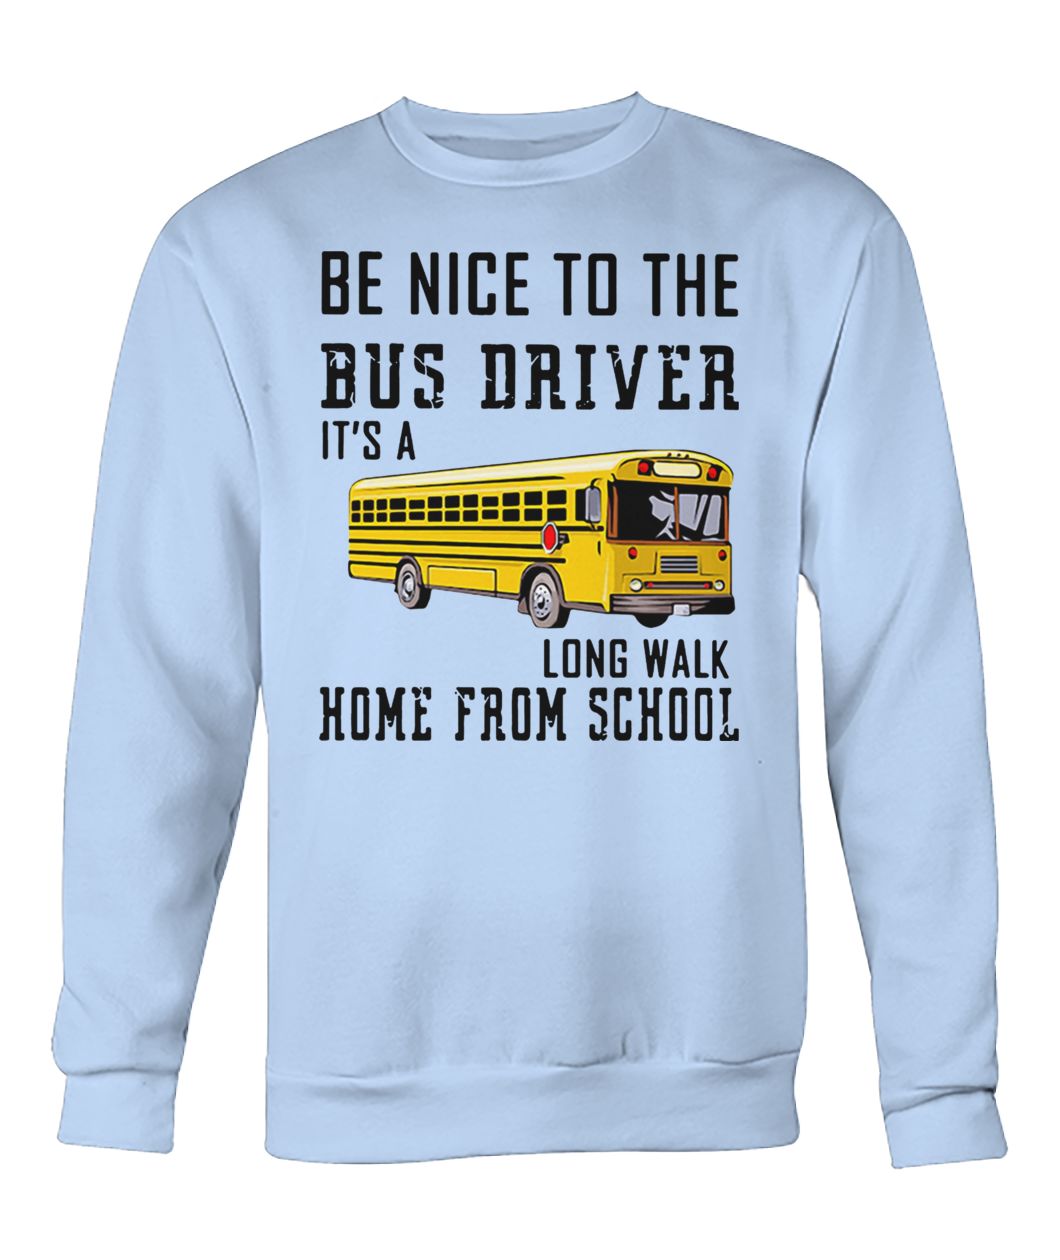 Be nice to the bus driver it's a long walk home from school crew neck sweatshirt